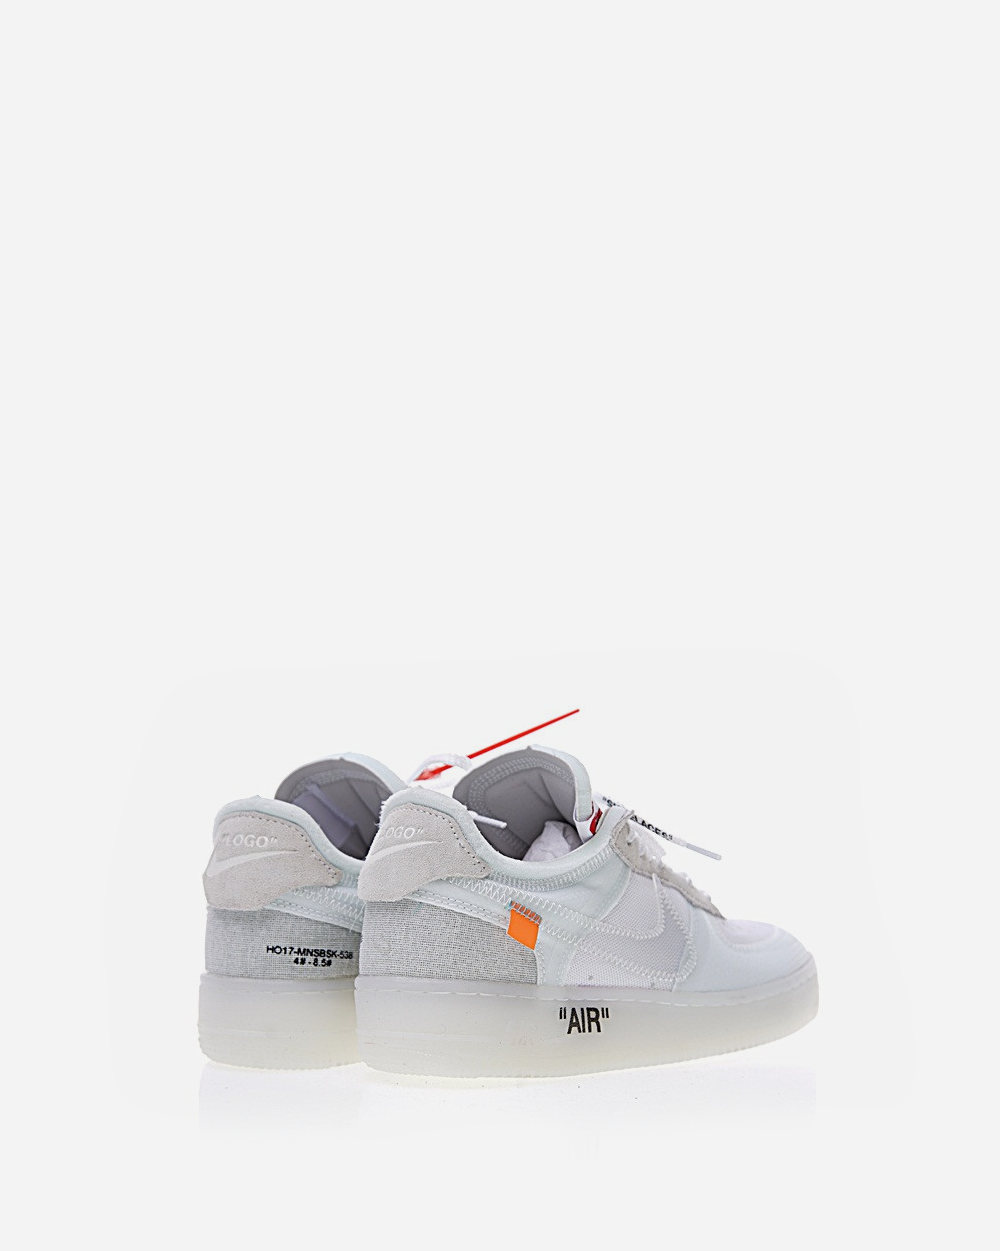 Nike x Air Force 1 Off White | WEARLINE